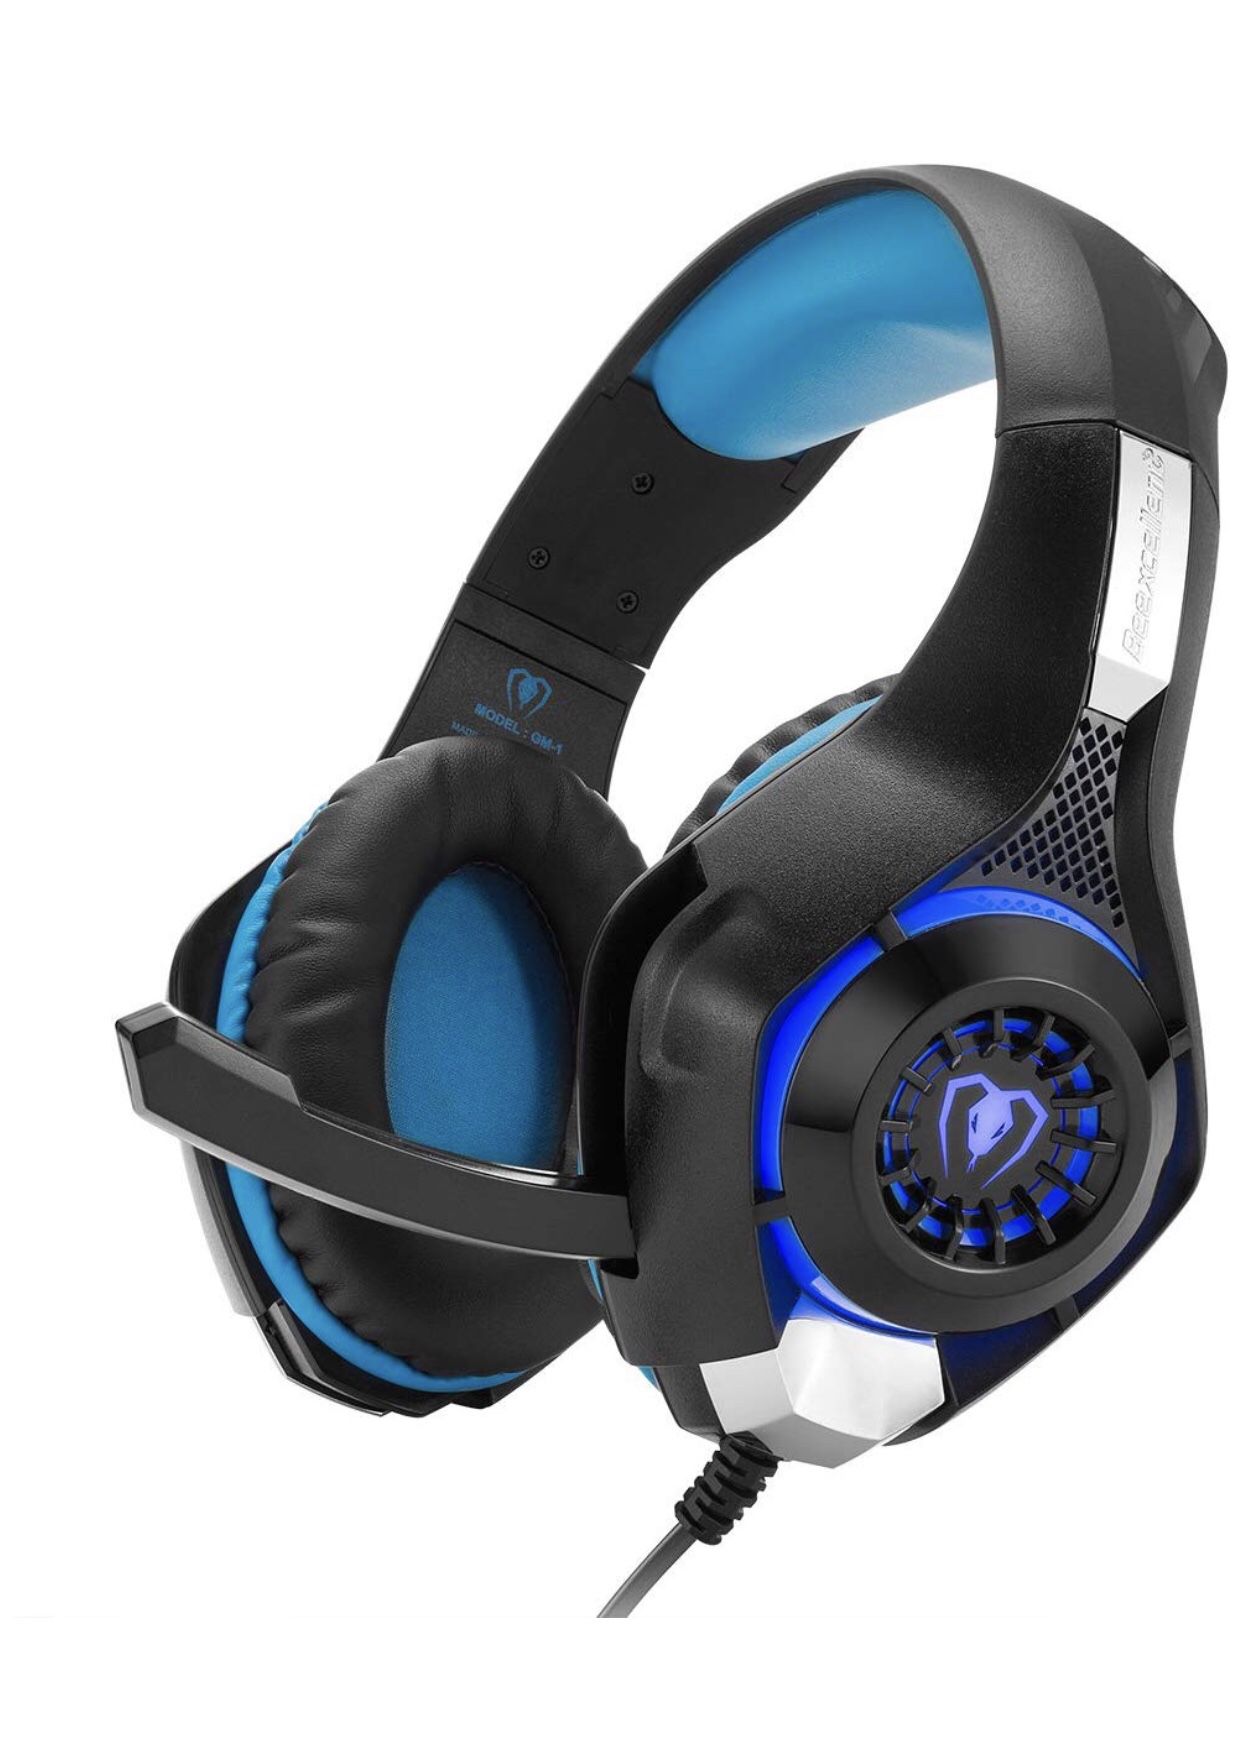 Gaming Headset GM-1 with Microphone for New Xbox 1 PS4 PC Cellphone Laptops Computer - Surround Sound, Noise Reduction Game Earphone-Easy Volume Cont